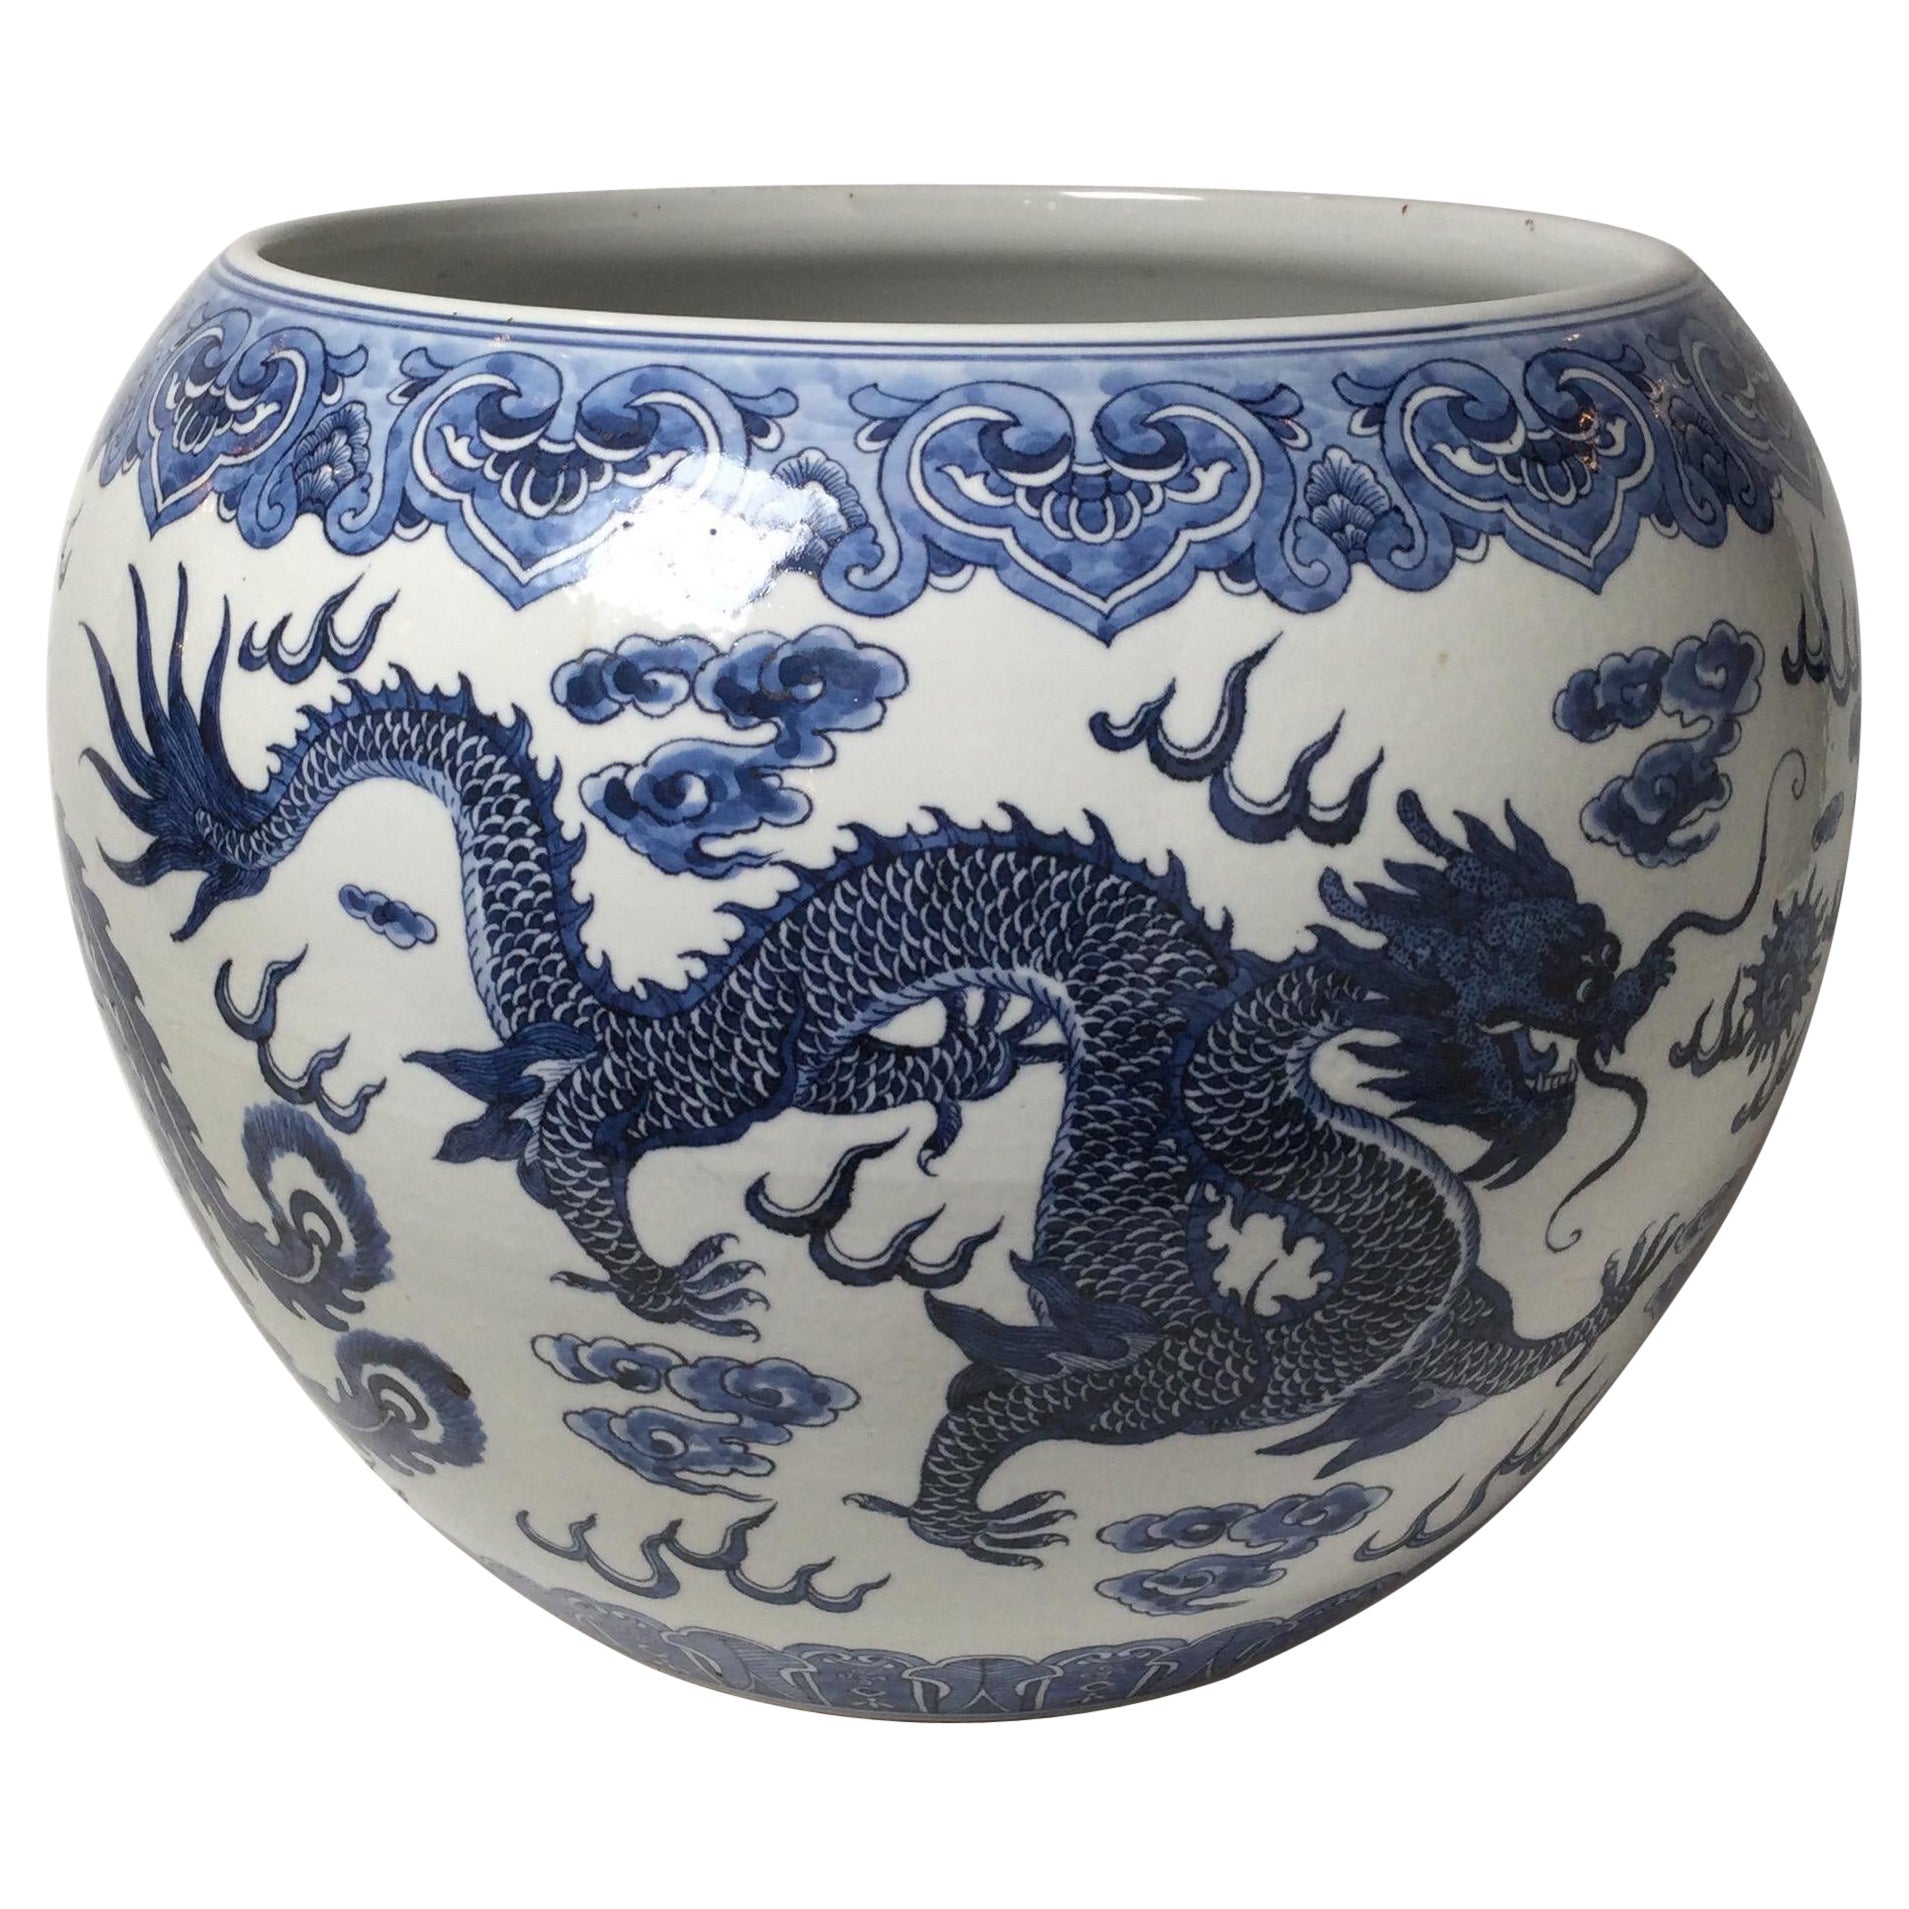 Large Blue and White Jardinière Planter with Dragon and Phoenix Bird